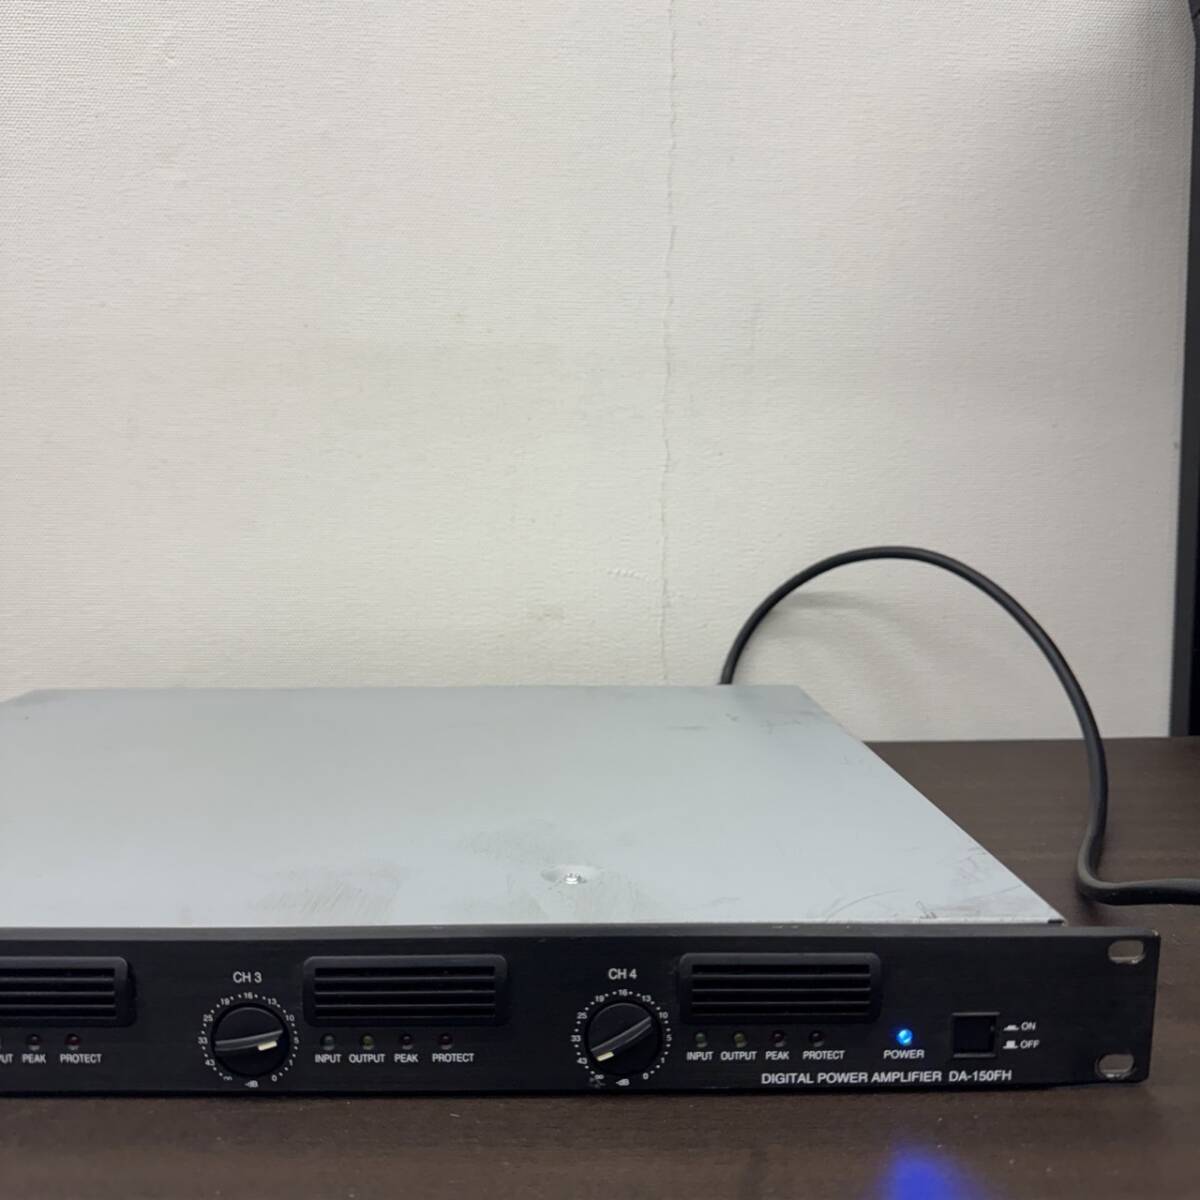  postage 1150 jpy ~ Junk electrification only has confirmed TOA digital power amplifier DA-150FHto-a serial number 14C8701672